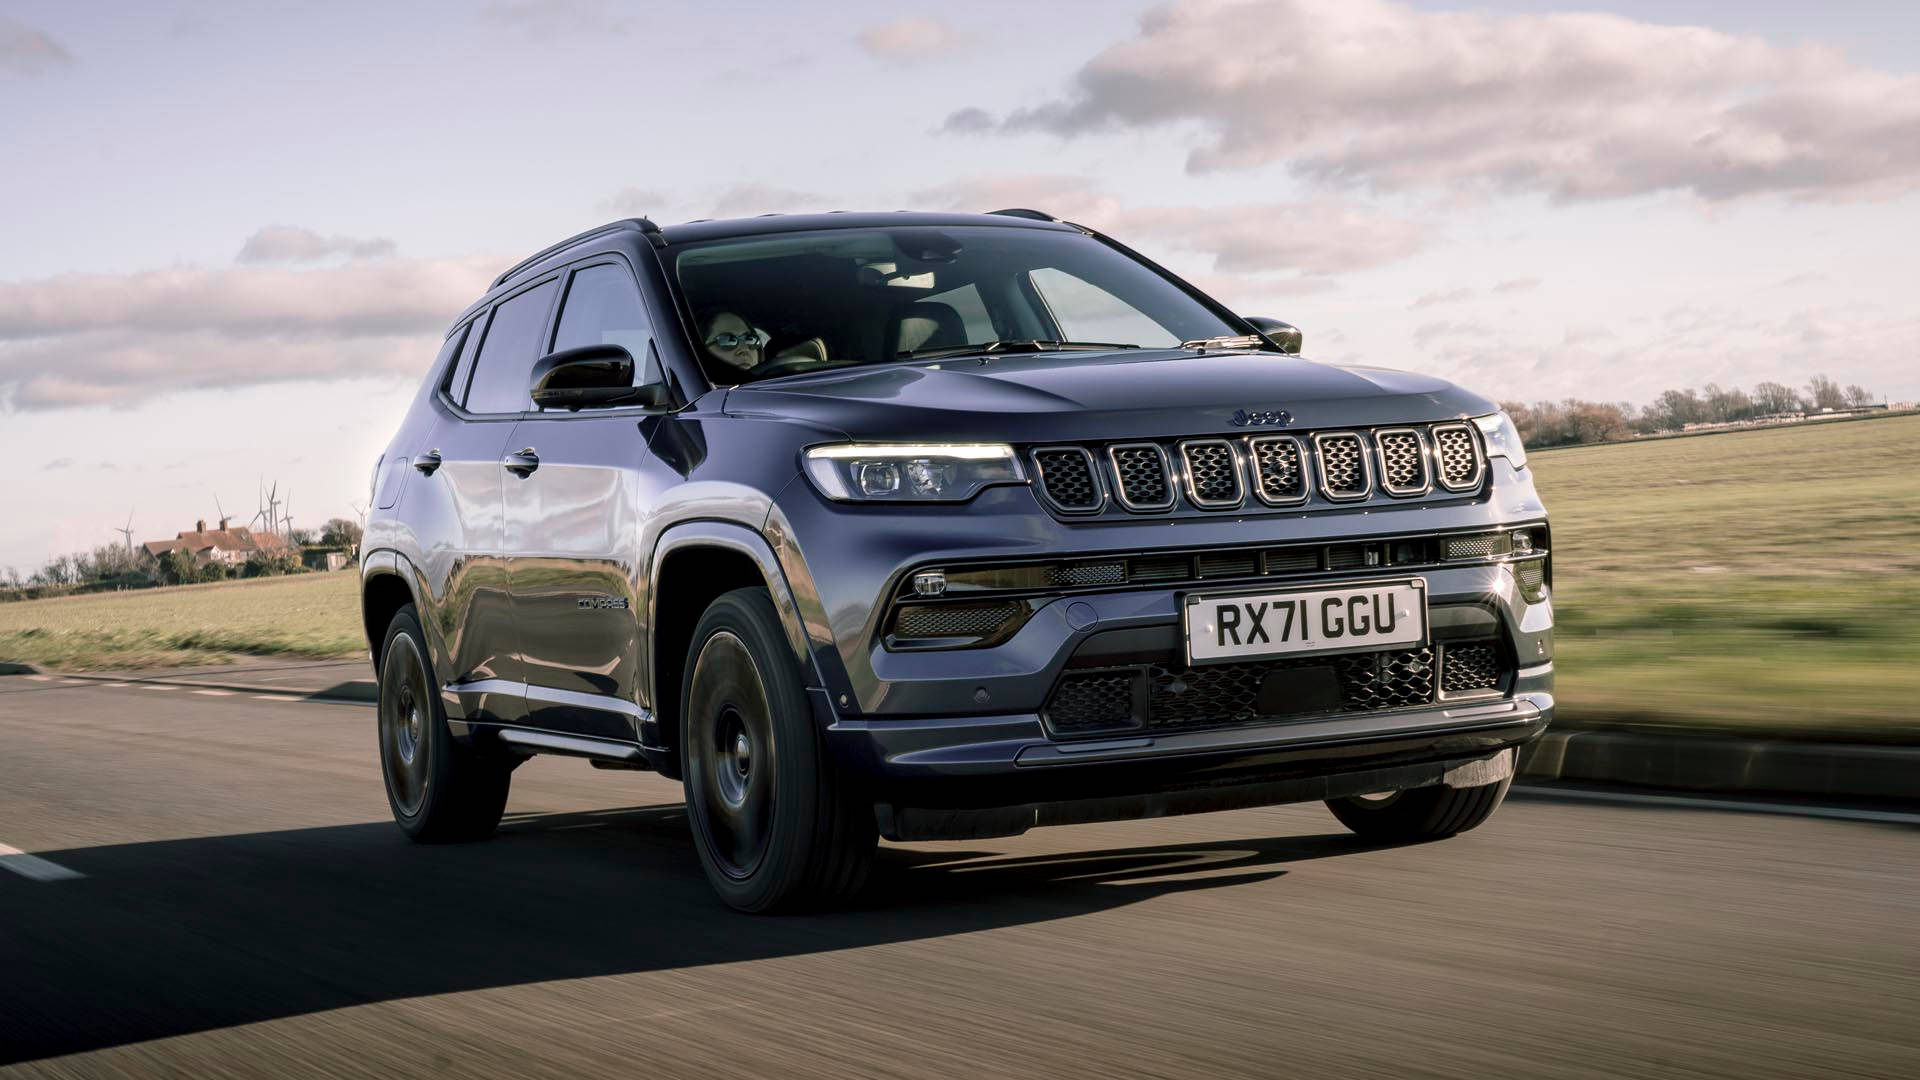 1K Jeep Compass Pictures  Download Free Images on Unsplash